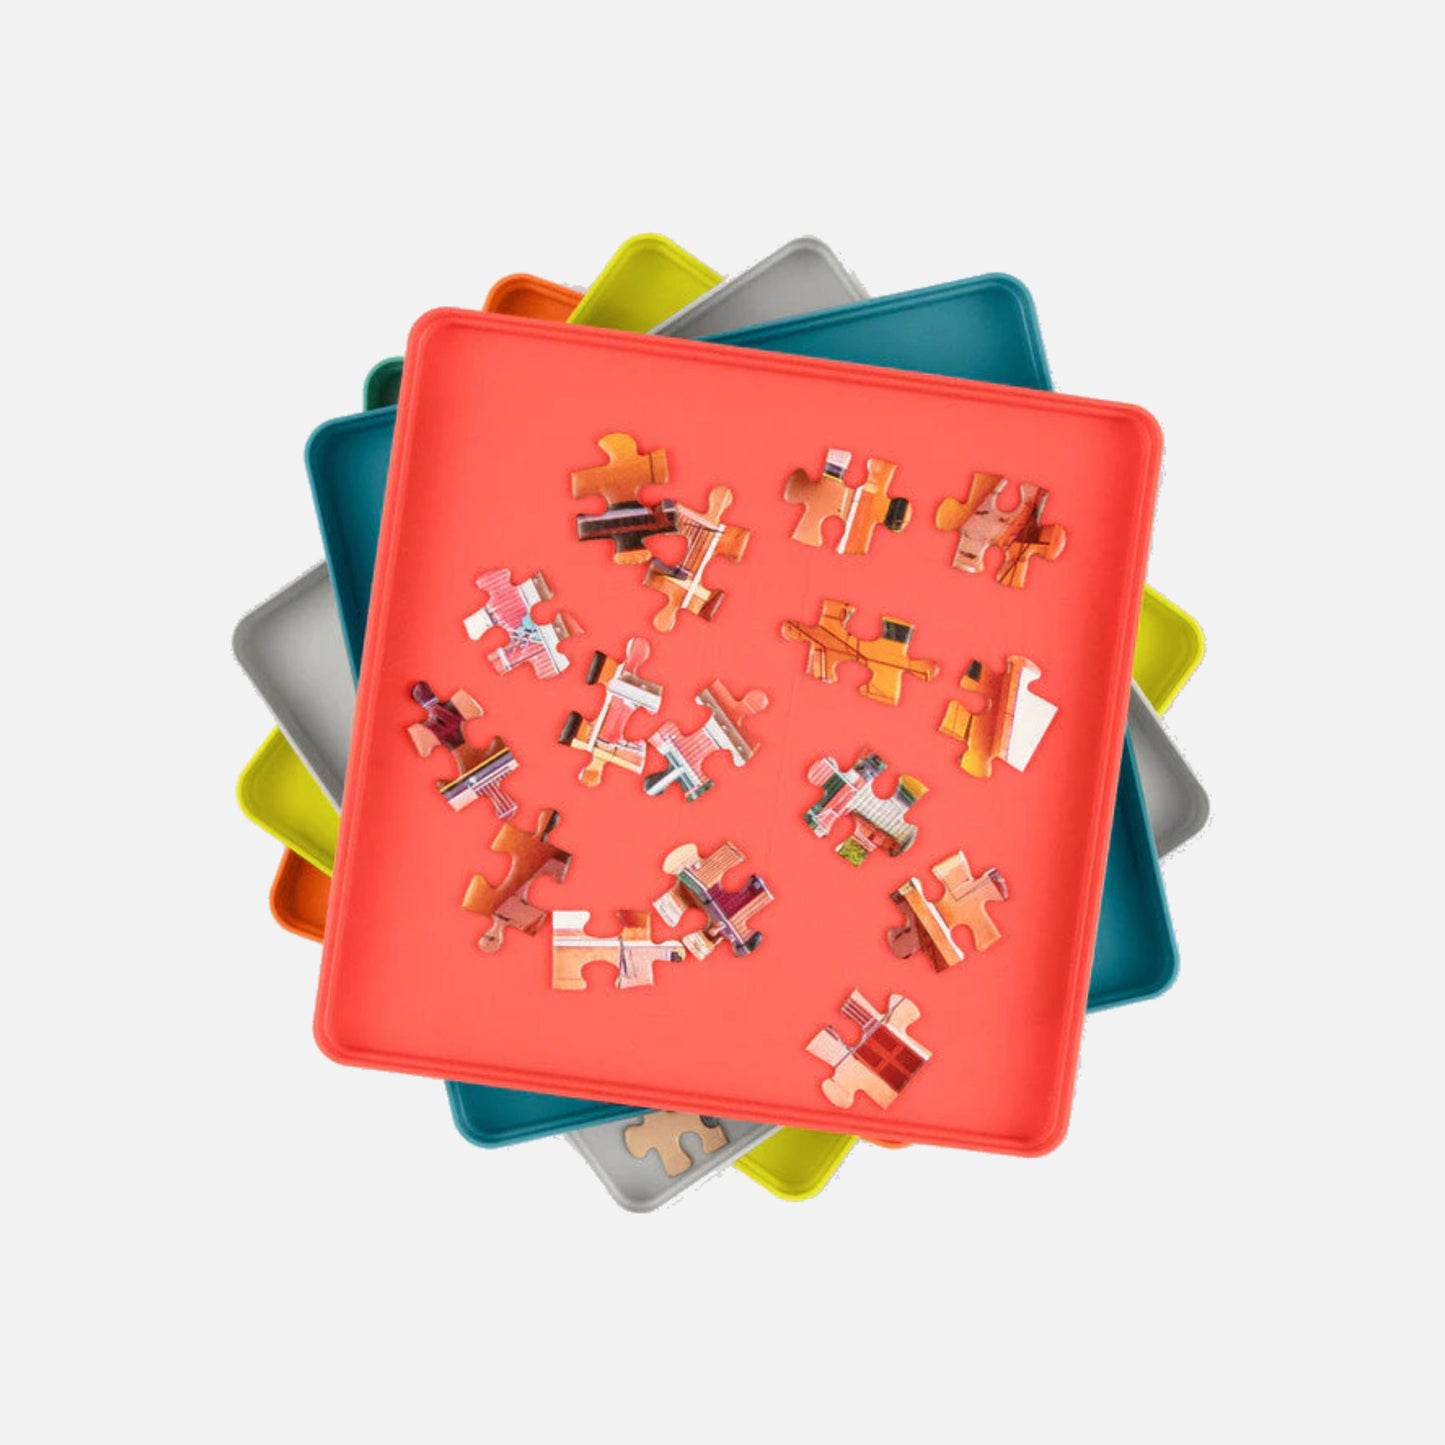 Stackable Puzzle Sorting Trays fra Galison (alle farver), 189 kr.